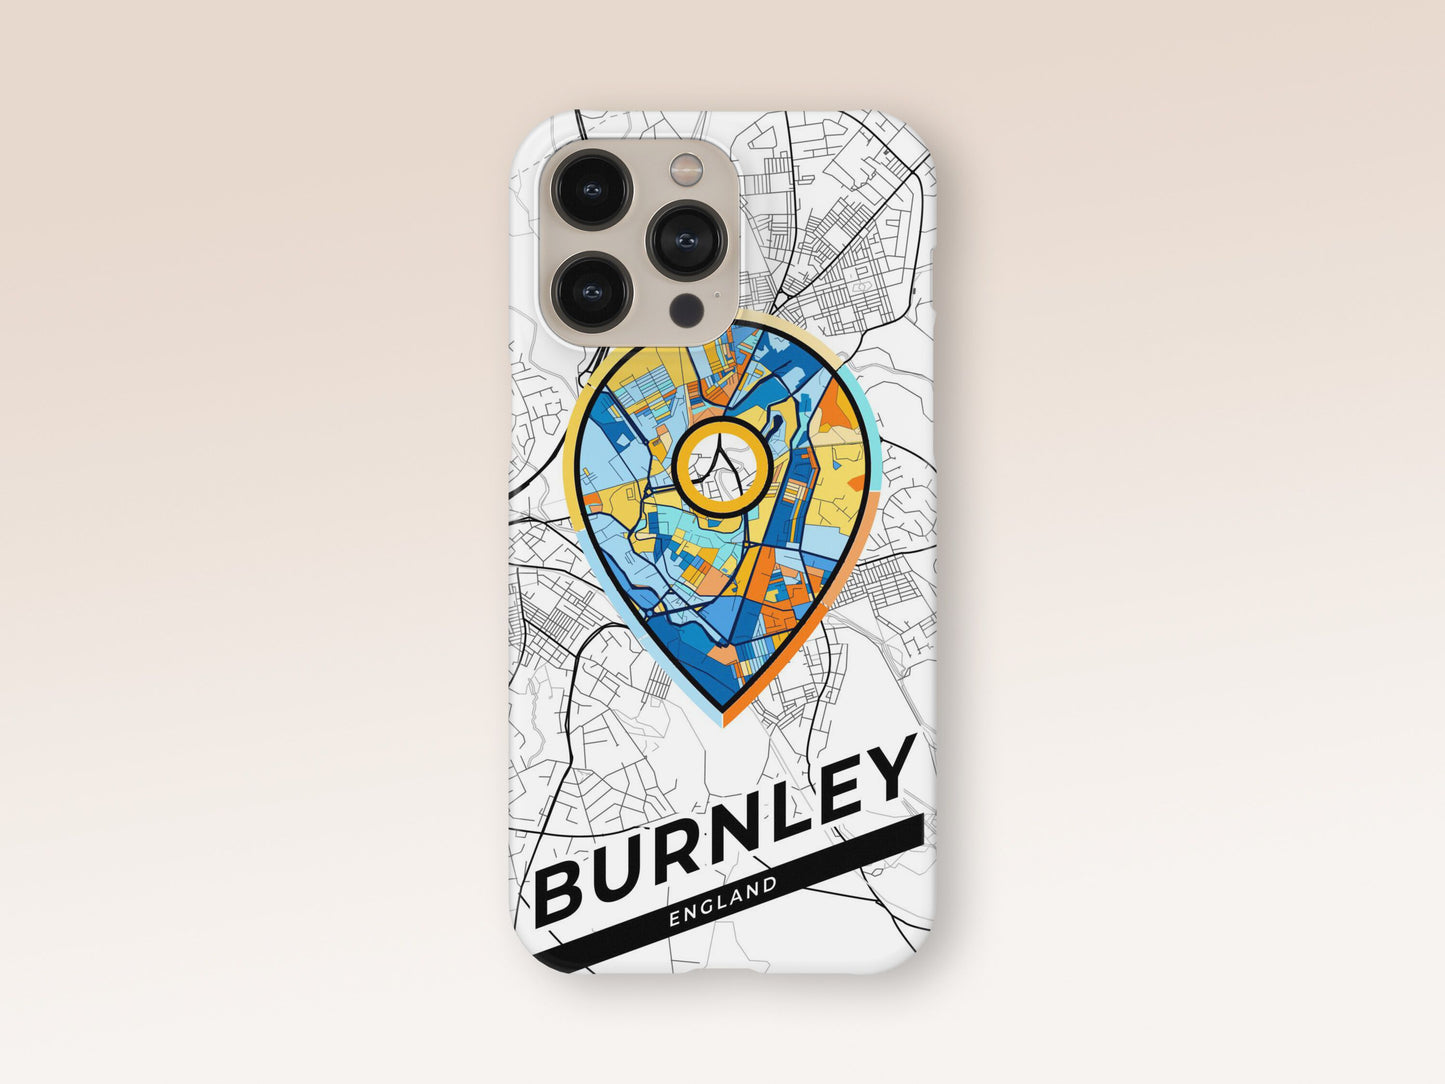 Burnley England slim phone case with colorful icon. Birthday, wedding or housewarming gift. Couple match cases. 1